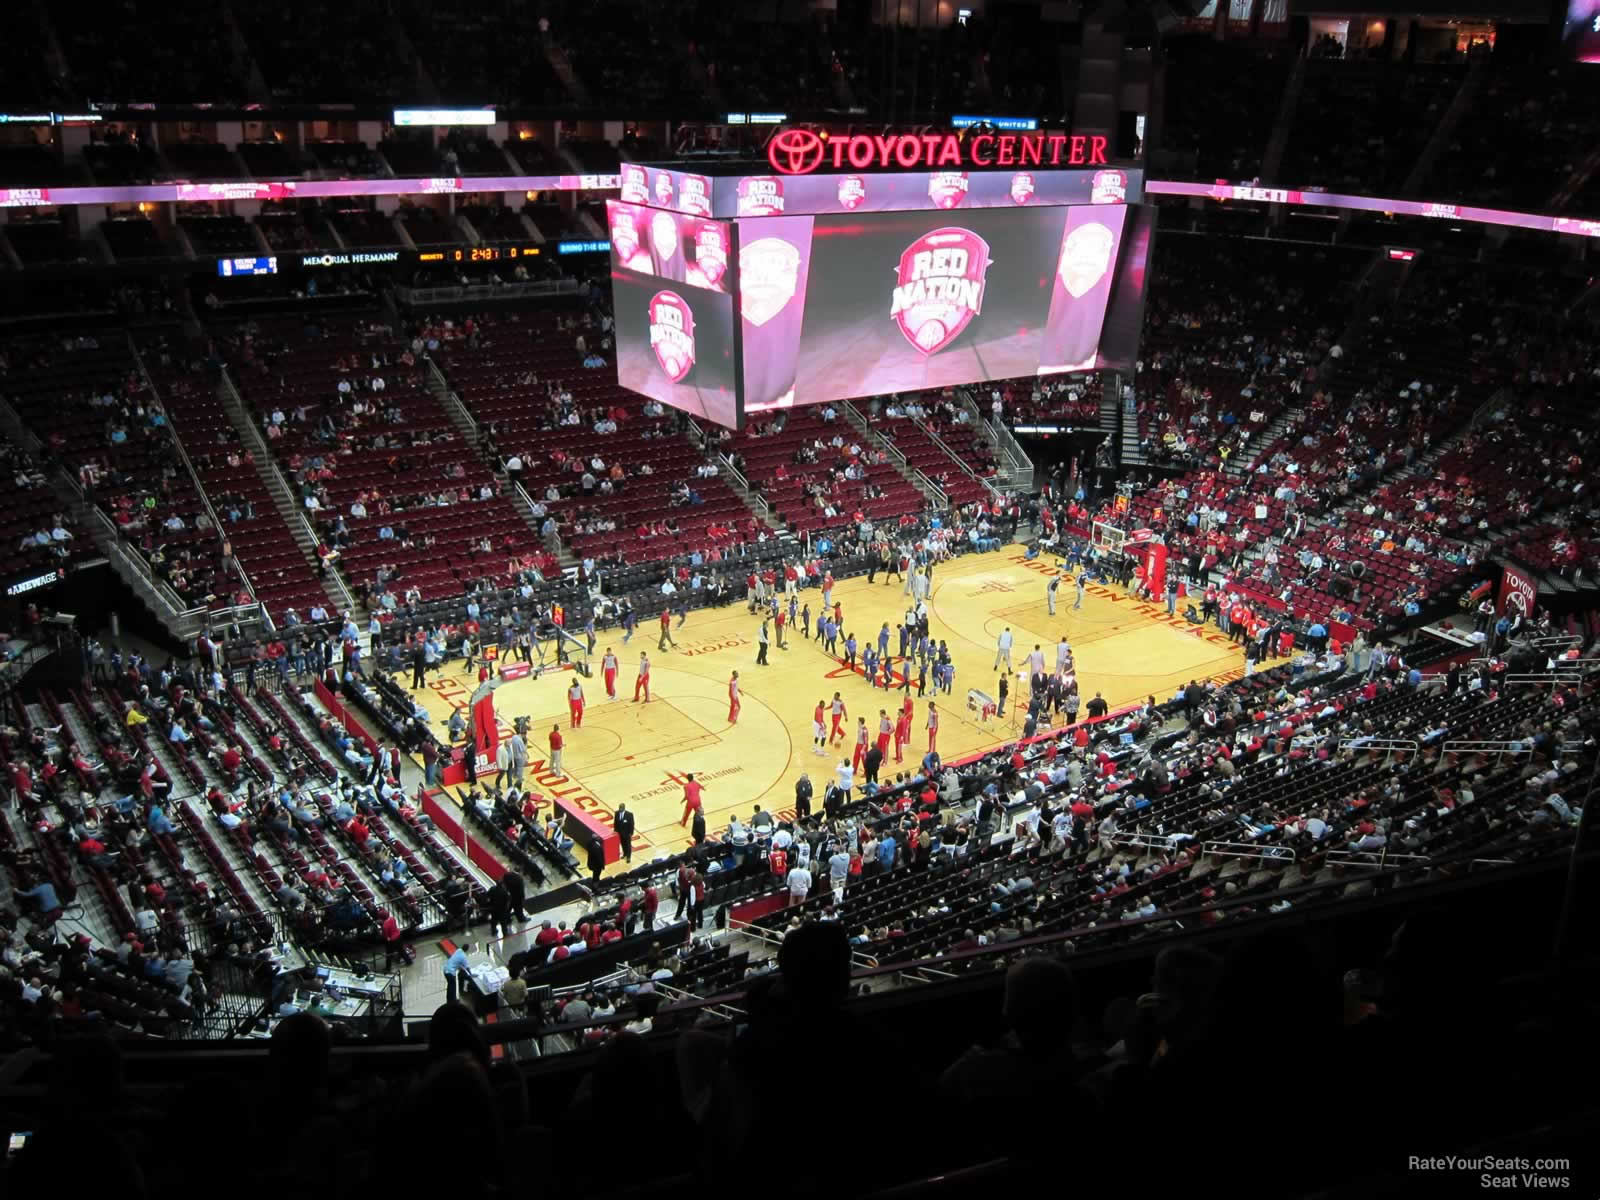 Section 430 at Toyota Center - RateYourSeats.com